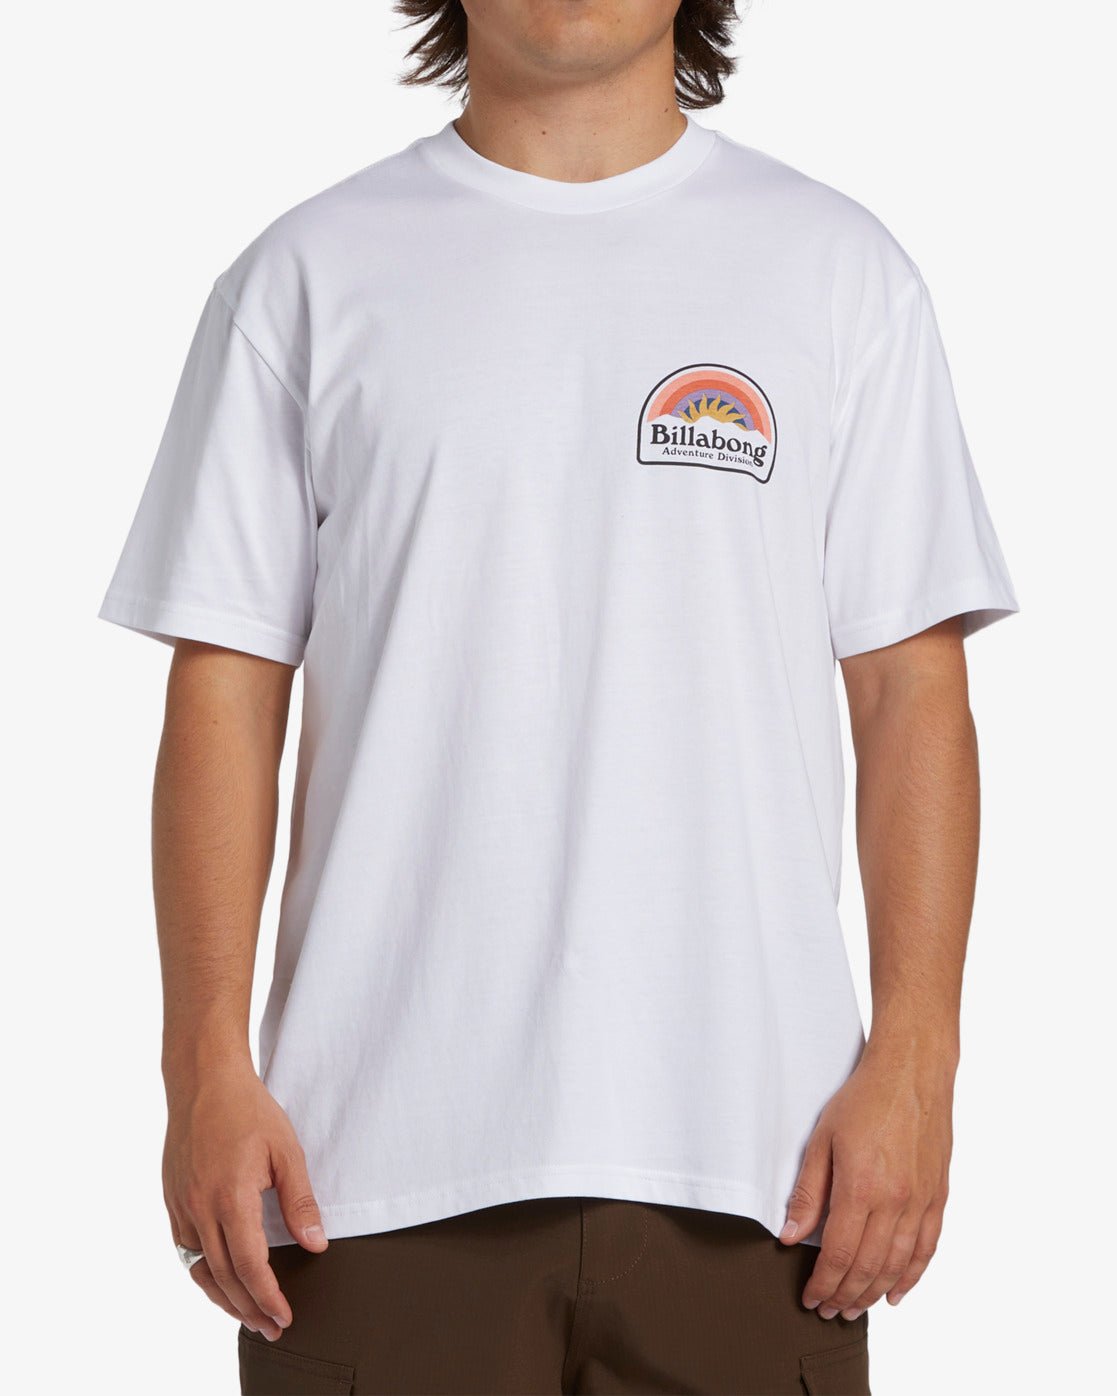 Billabong Adventure Division Sun Up Tee in white from front